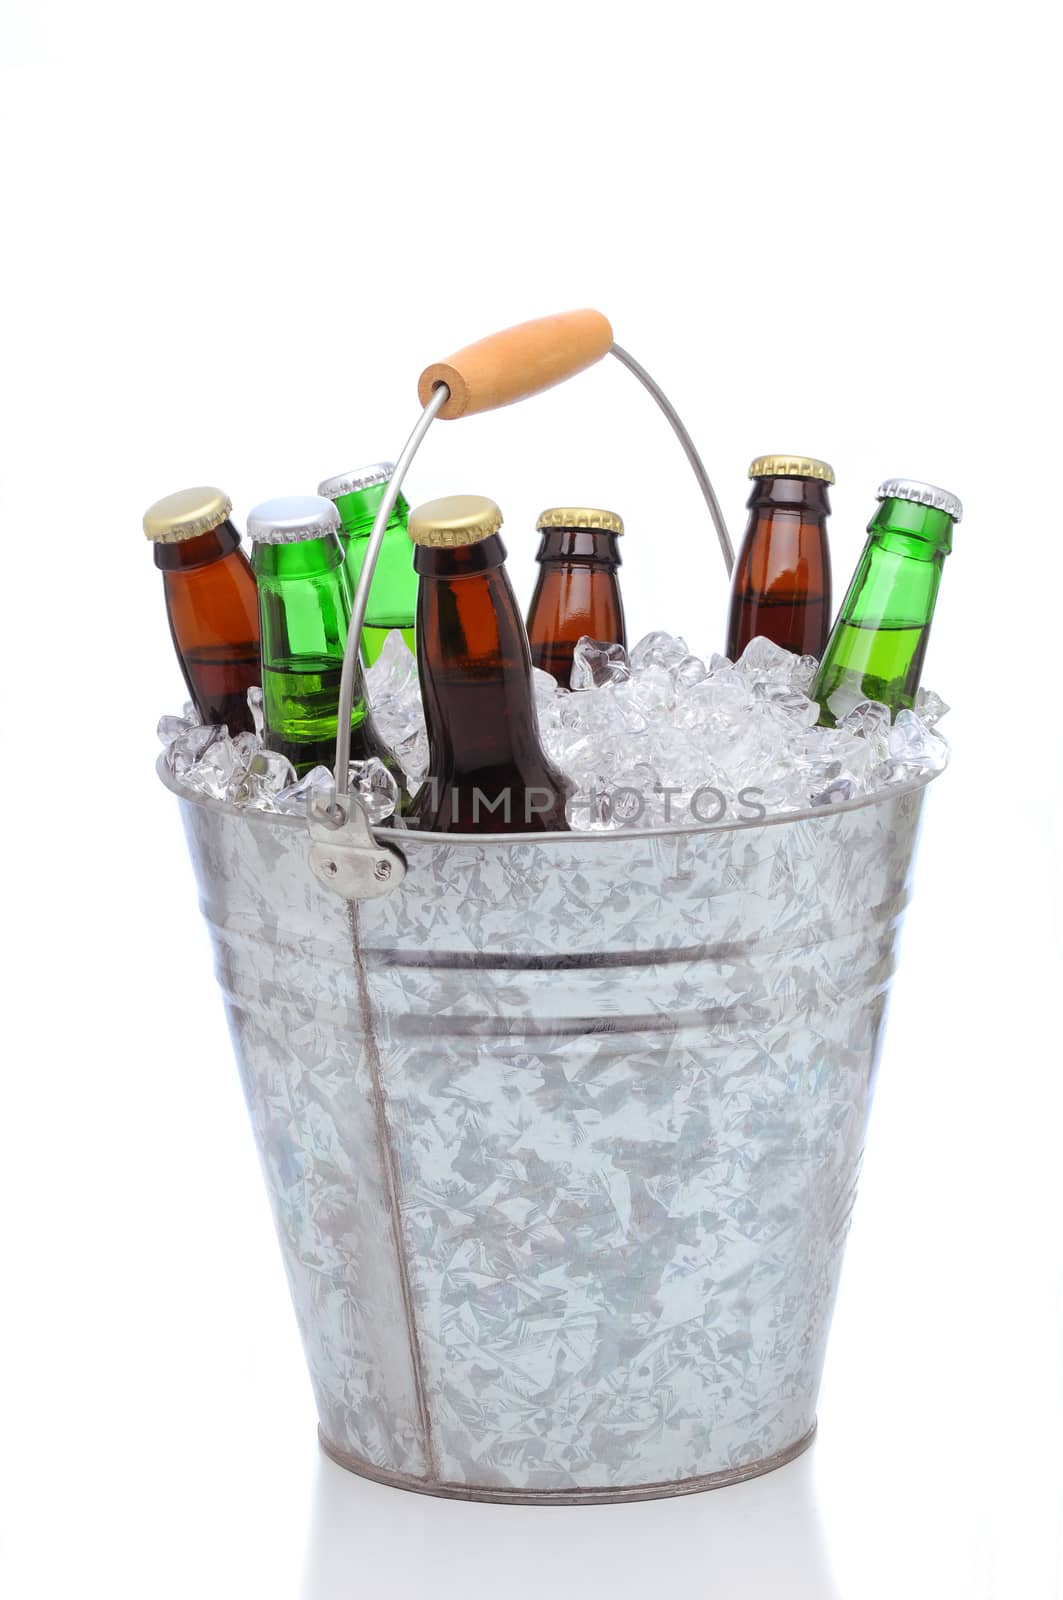 Assorted beer bottles in a bucket of ice by sCukrov